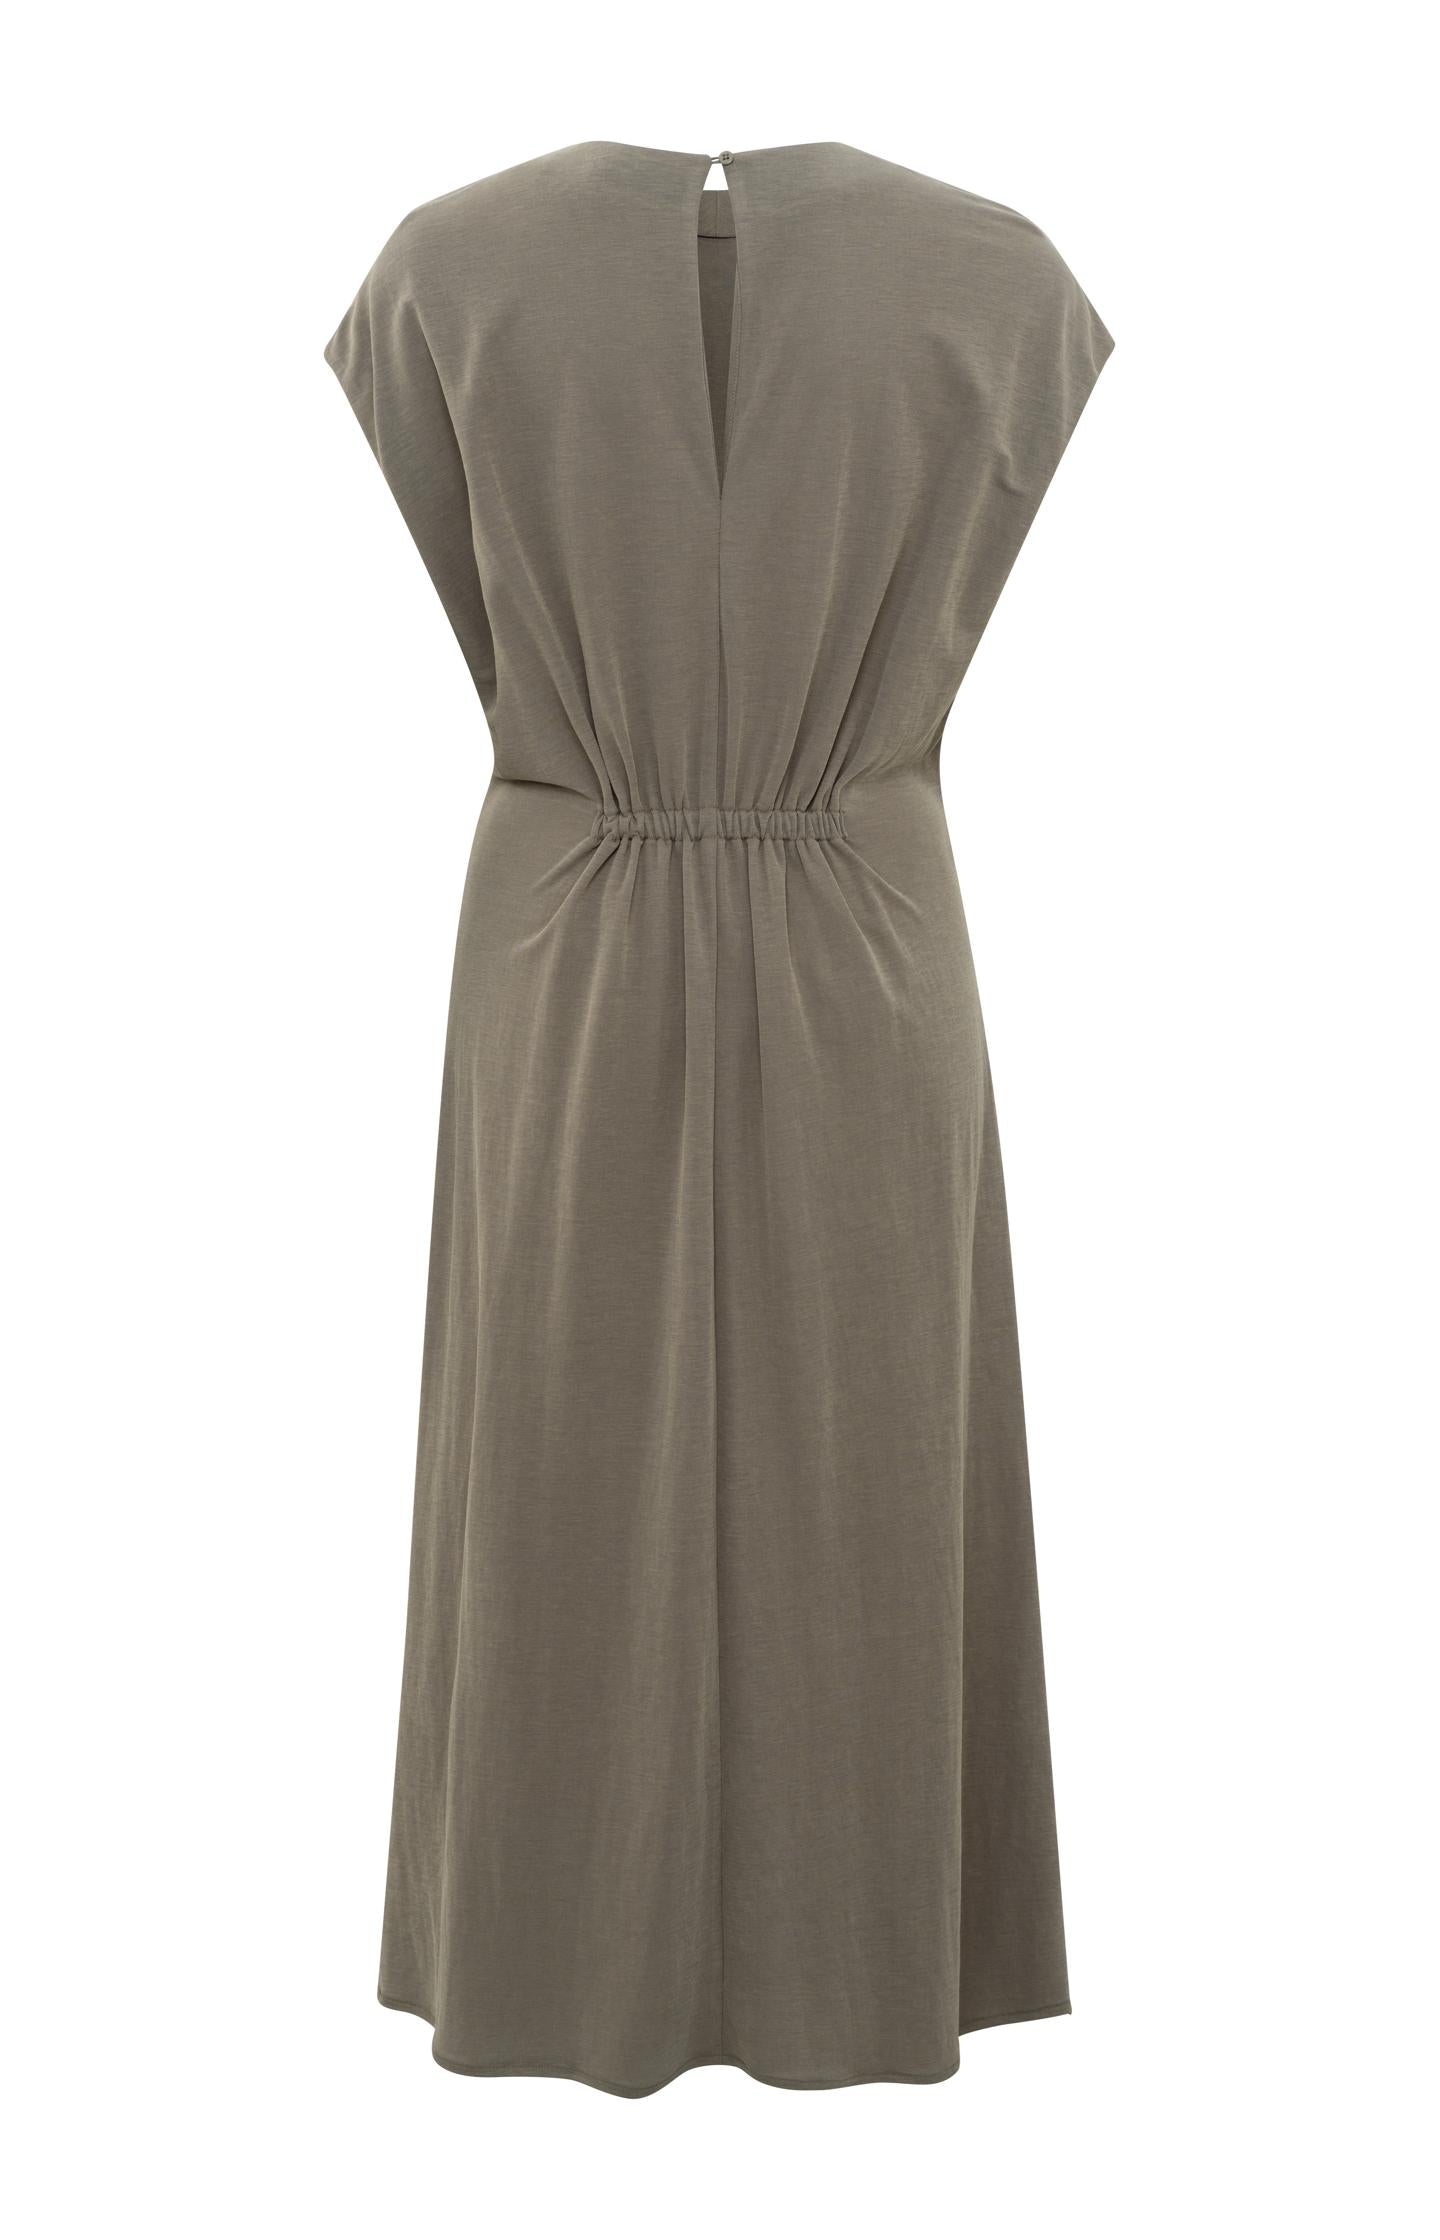 Midi dress with cap sleeves, faux wrap and pleated details